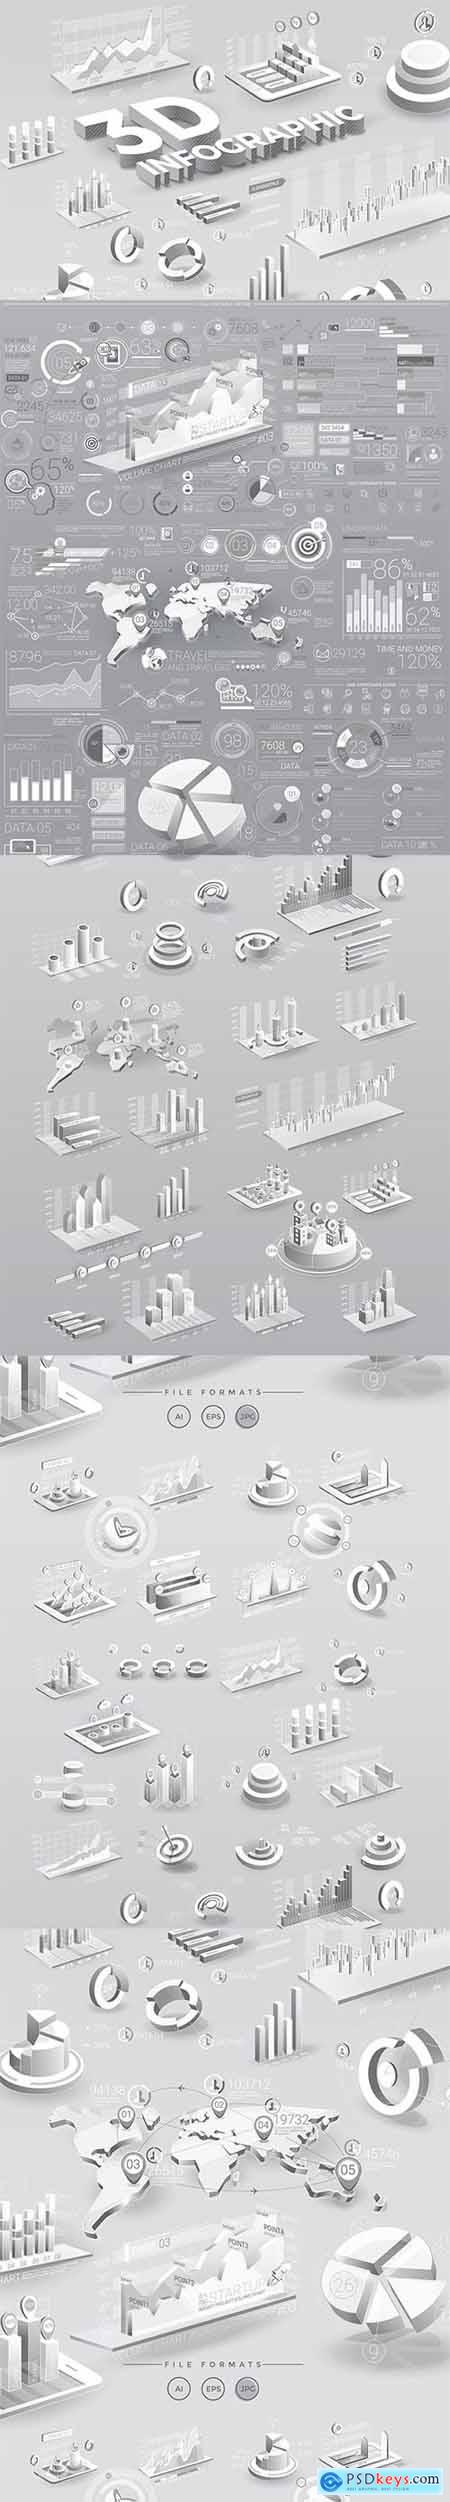 White Infographic Elements